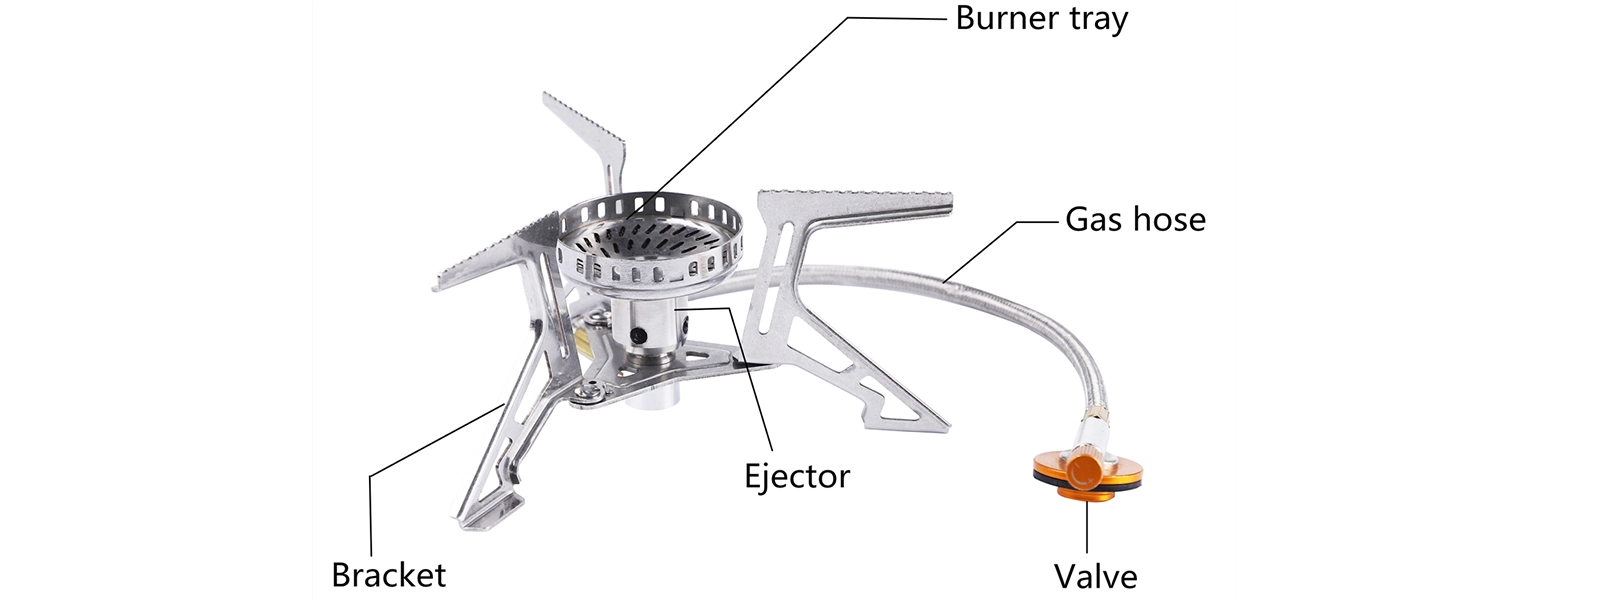 details of High Power Canister Stove Butane/Propane Gas Burner for Hiking Camping